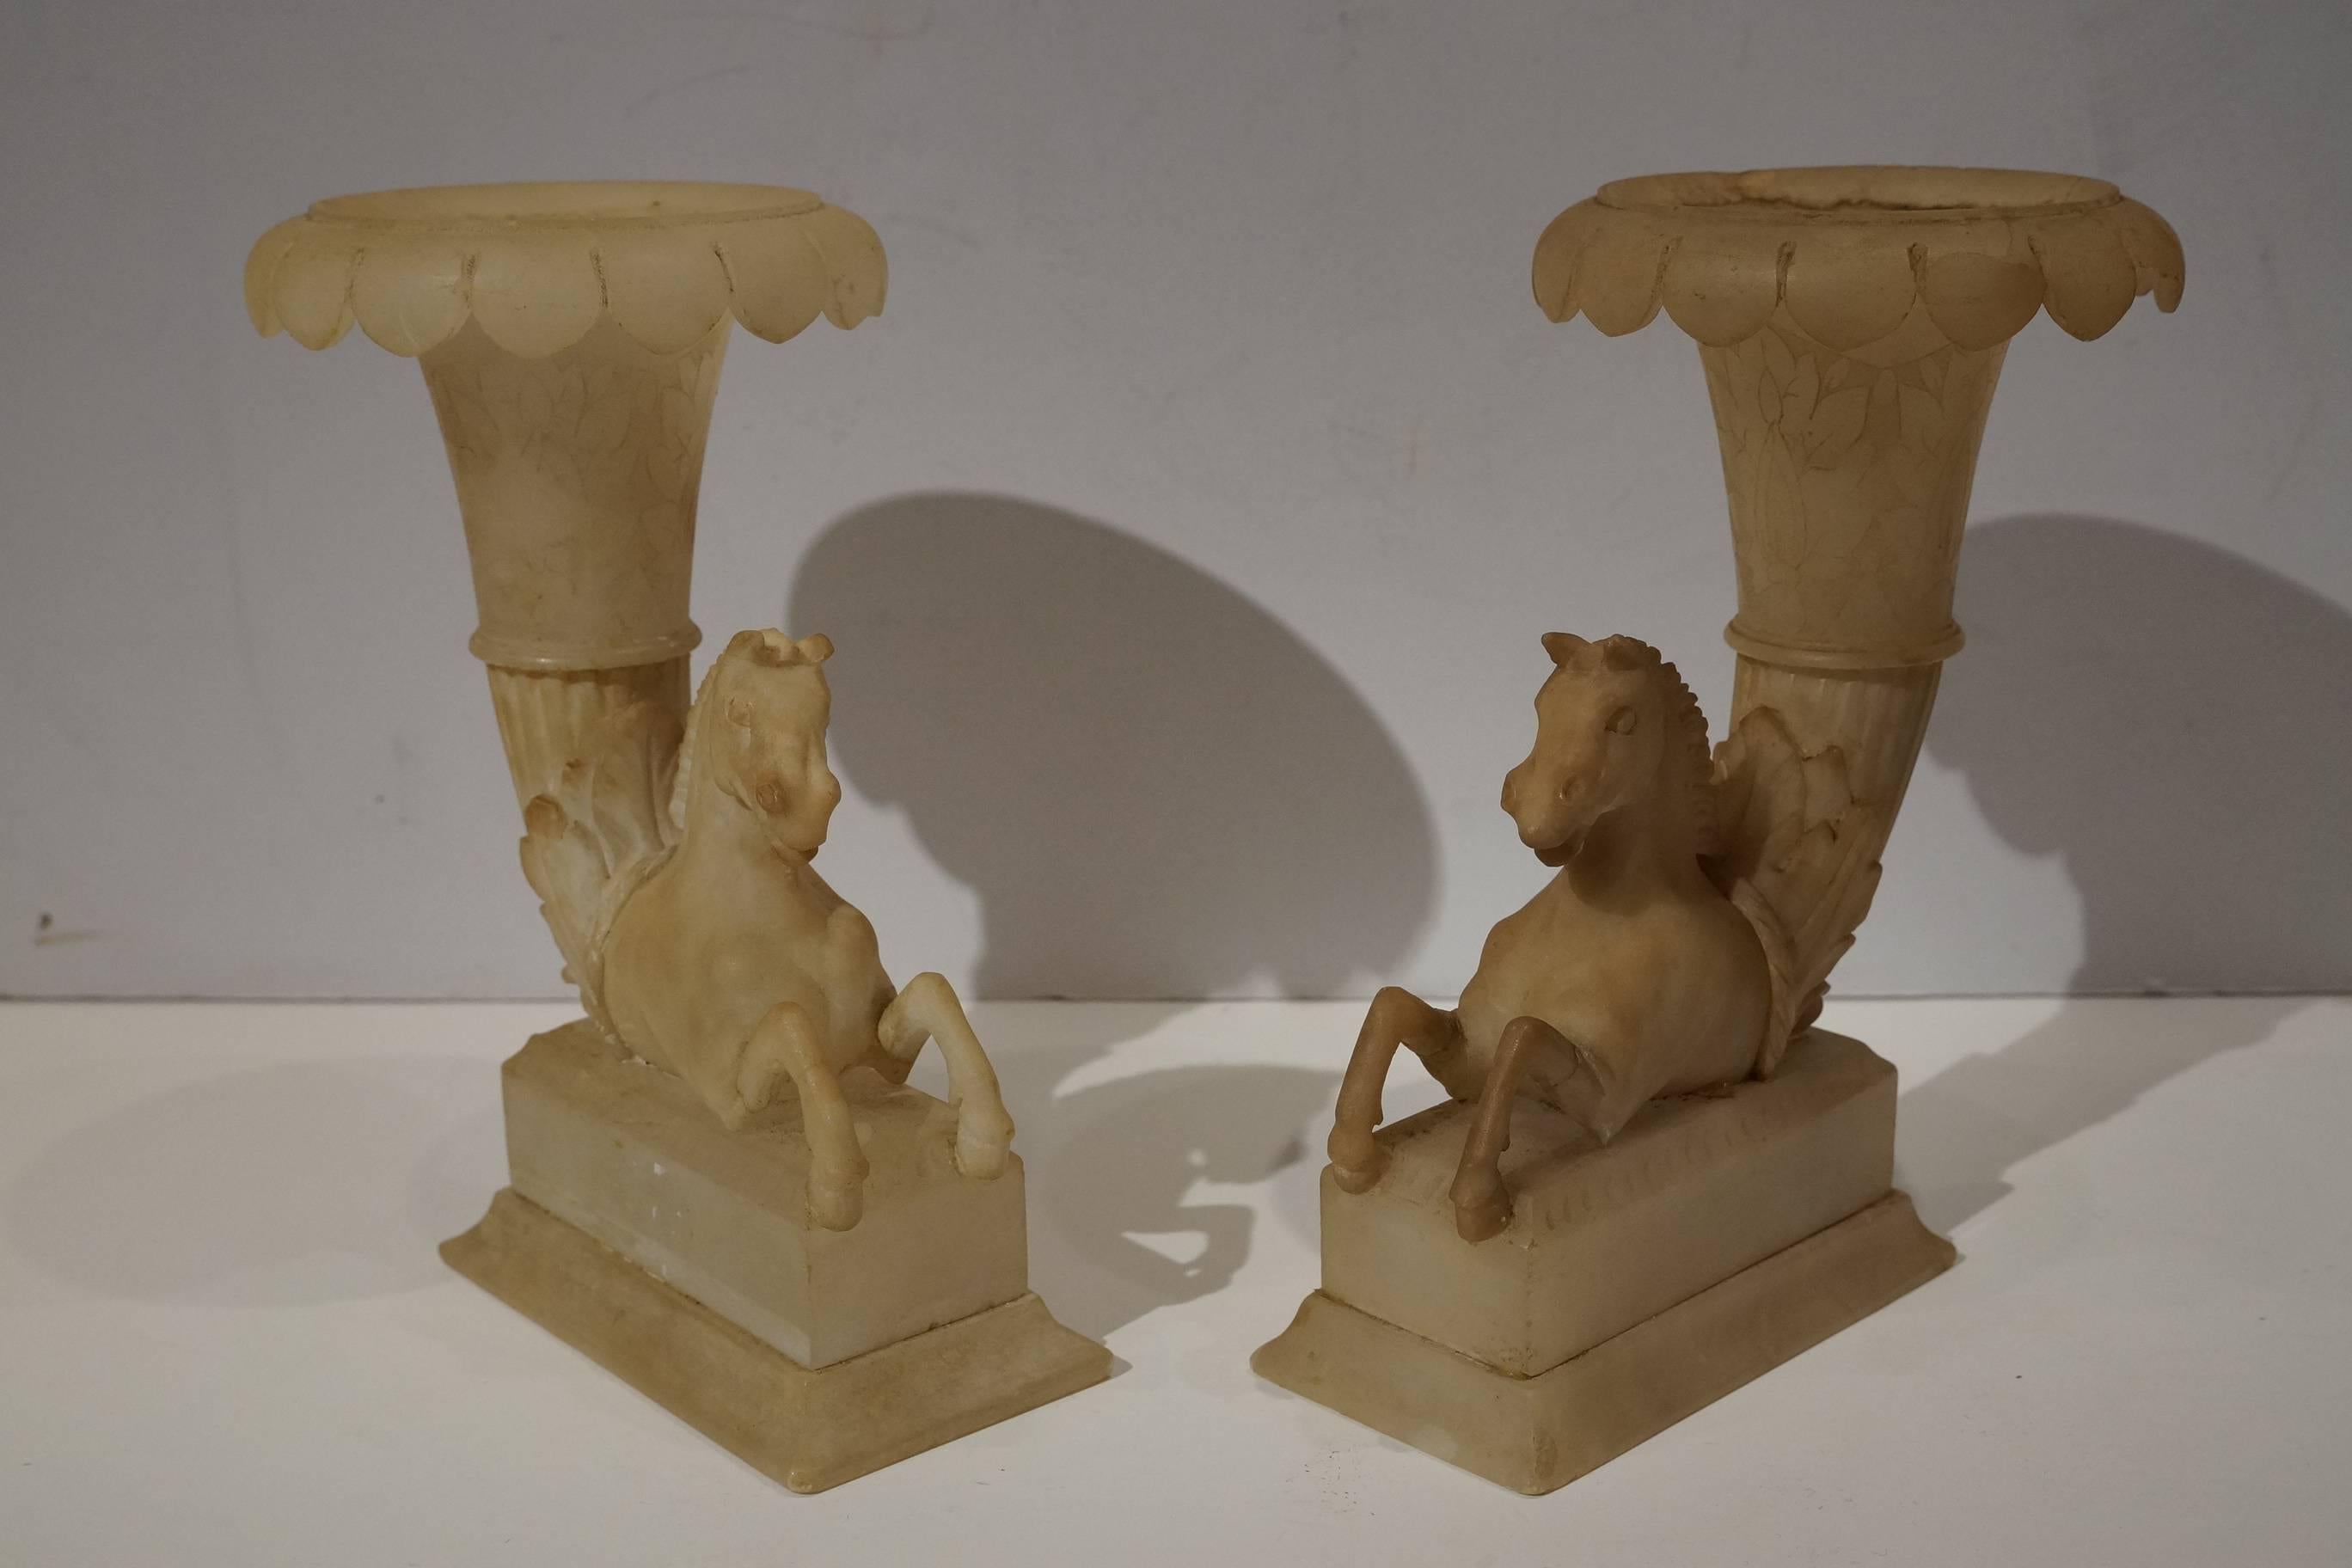 A pair of Italian Grand Tour Alabaster Cornucopia vases
having foliate rim vases supported by hippocampi, on rectangular plinth bases.
Measures: Height 7 inches.